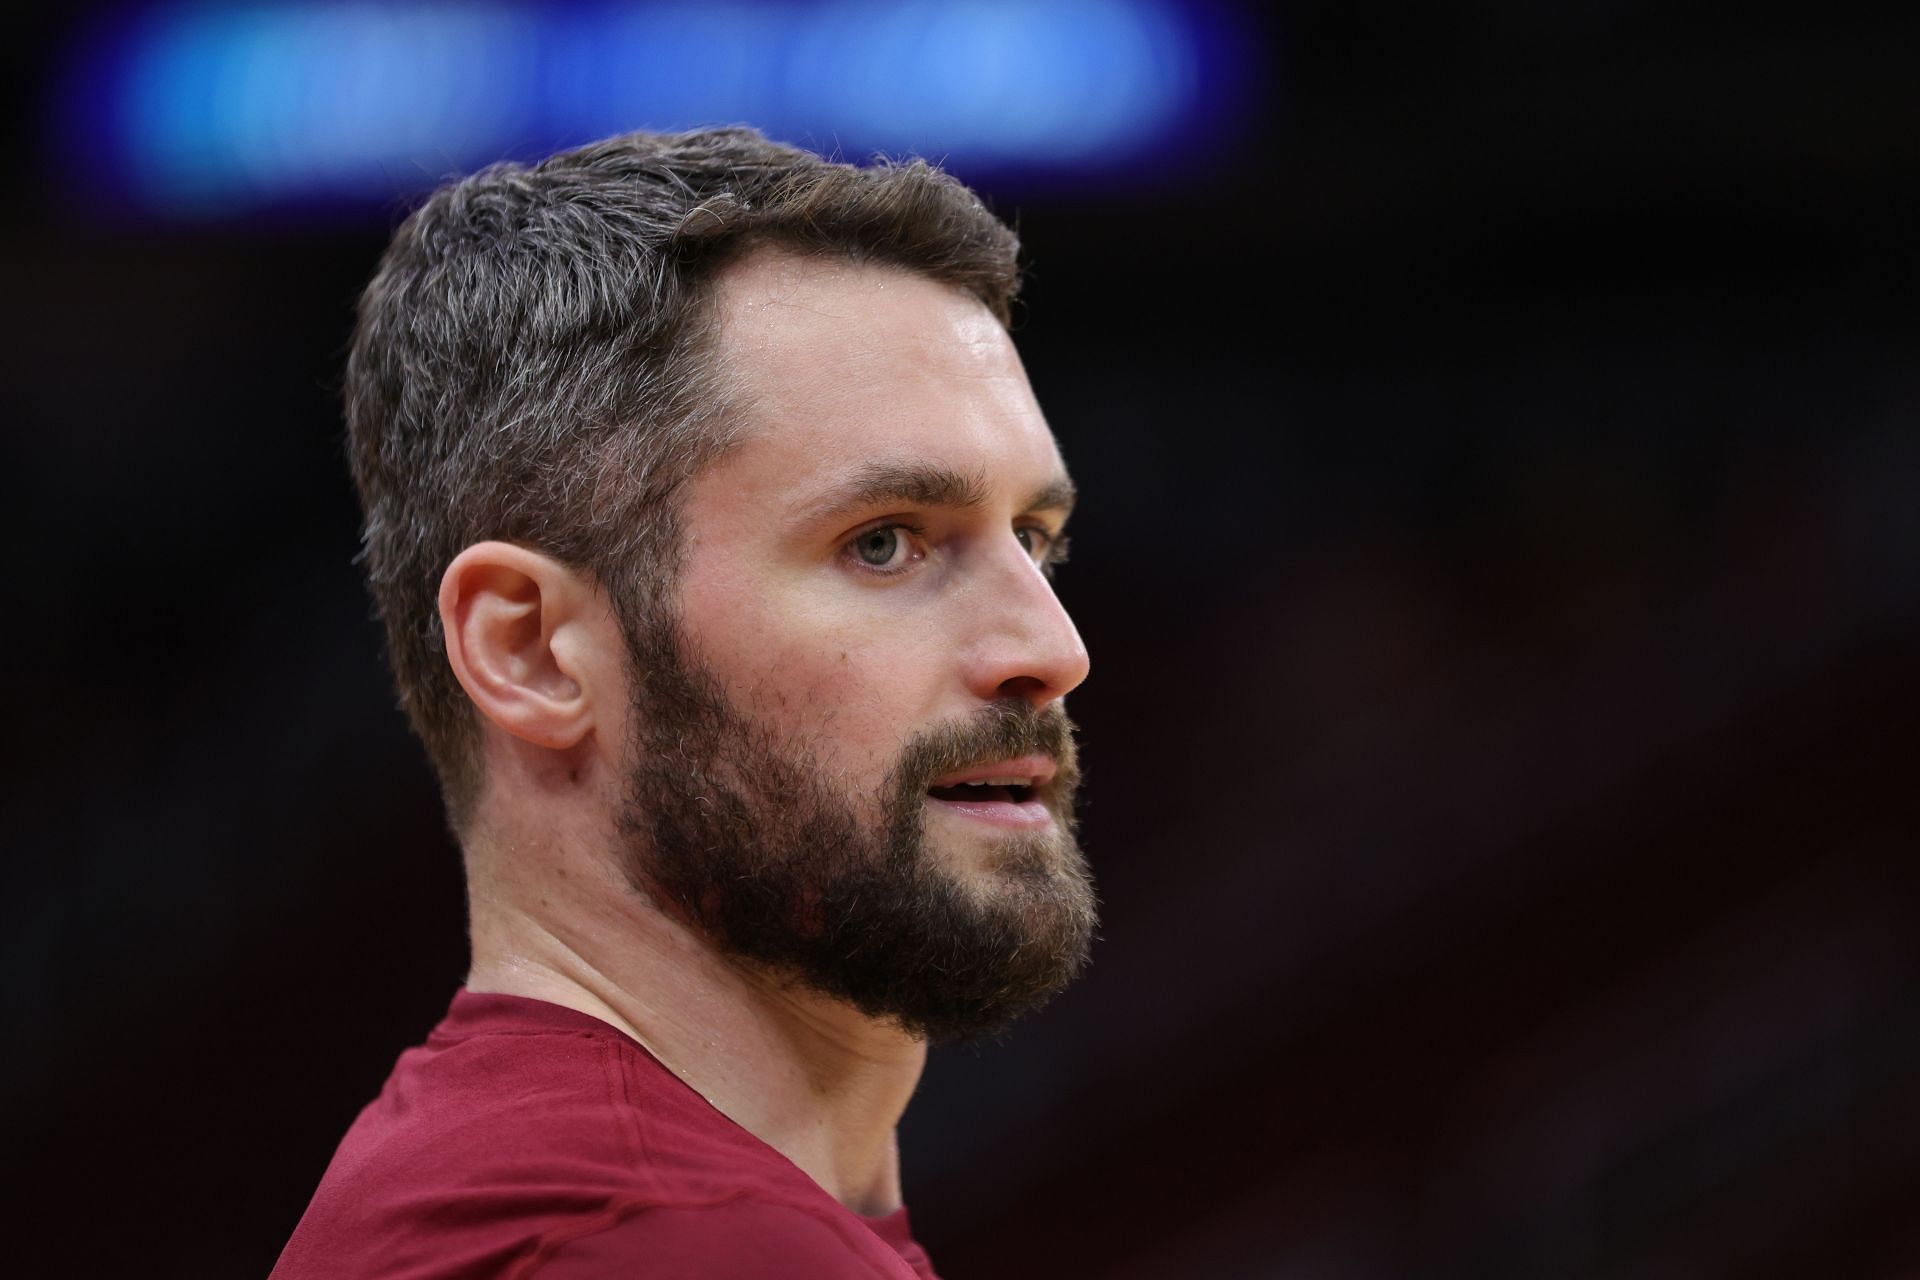 Kevin Love - Cleveland Cavaliers